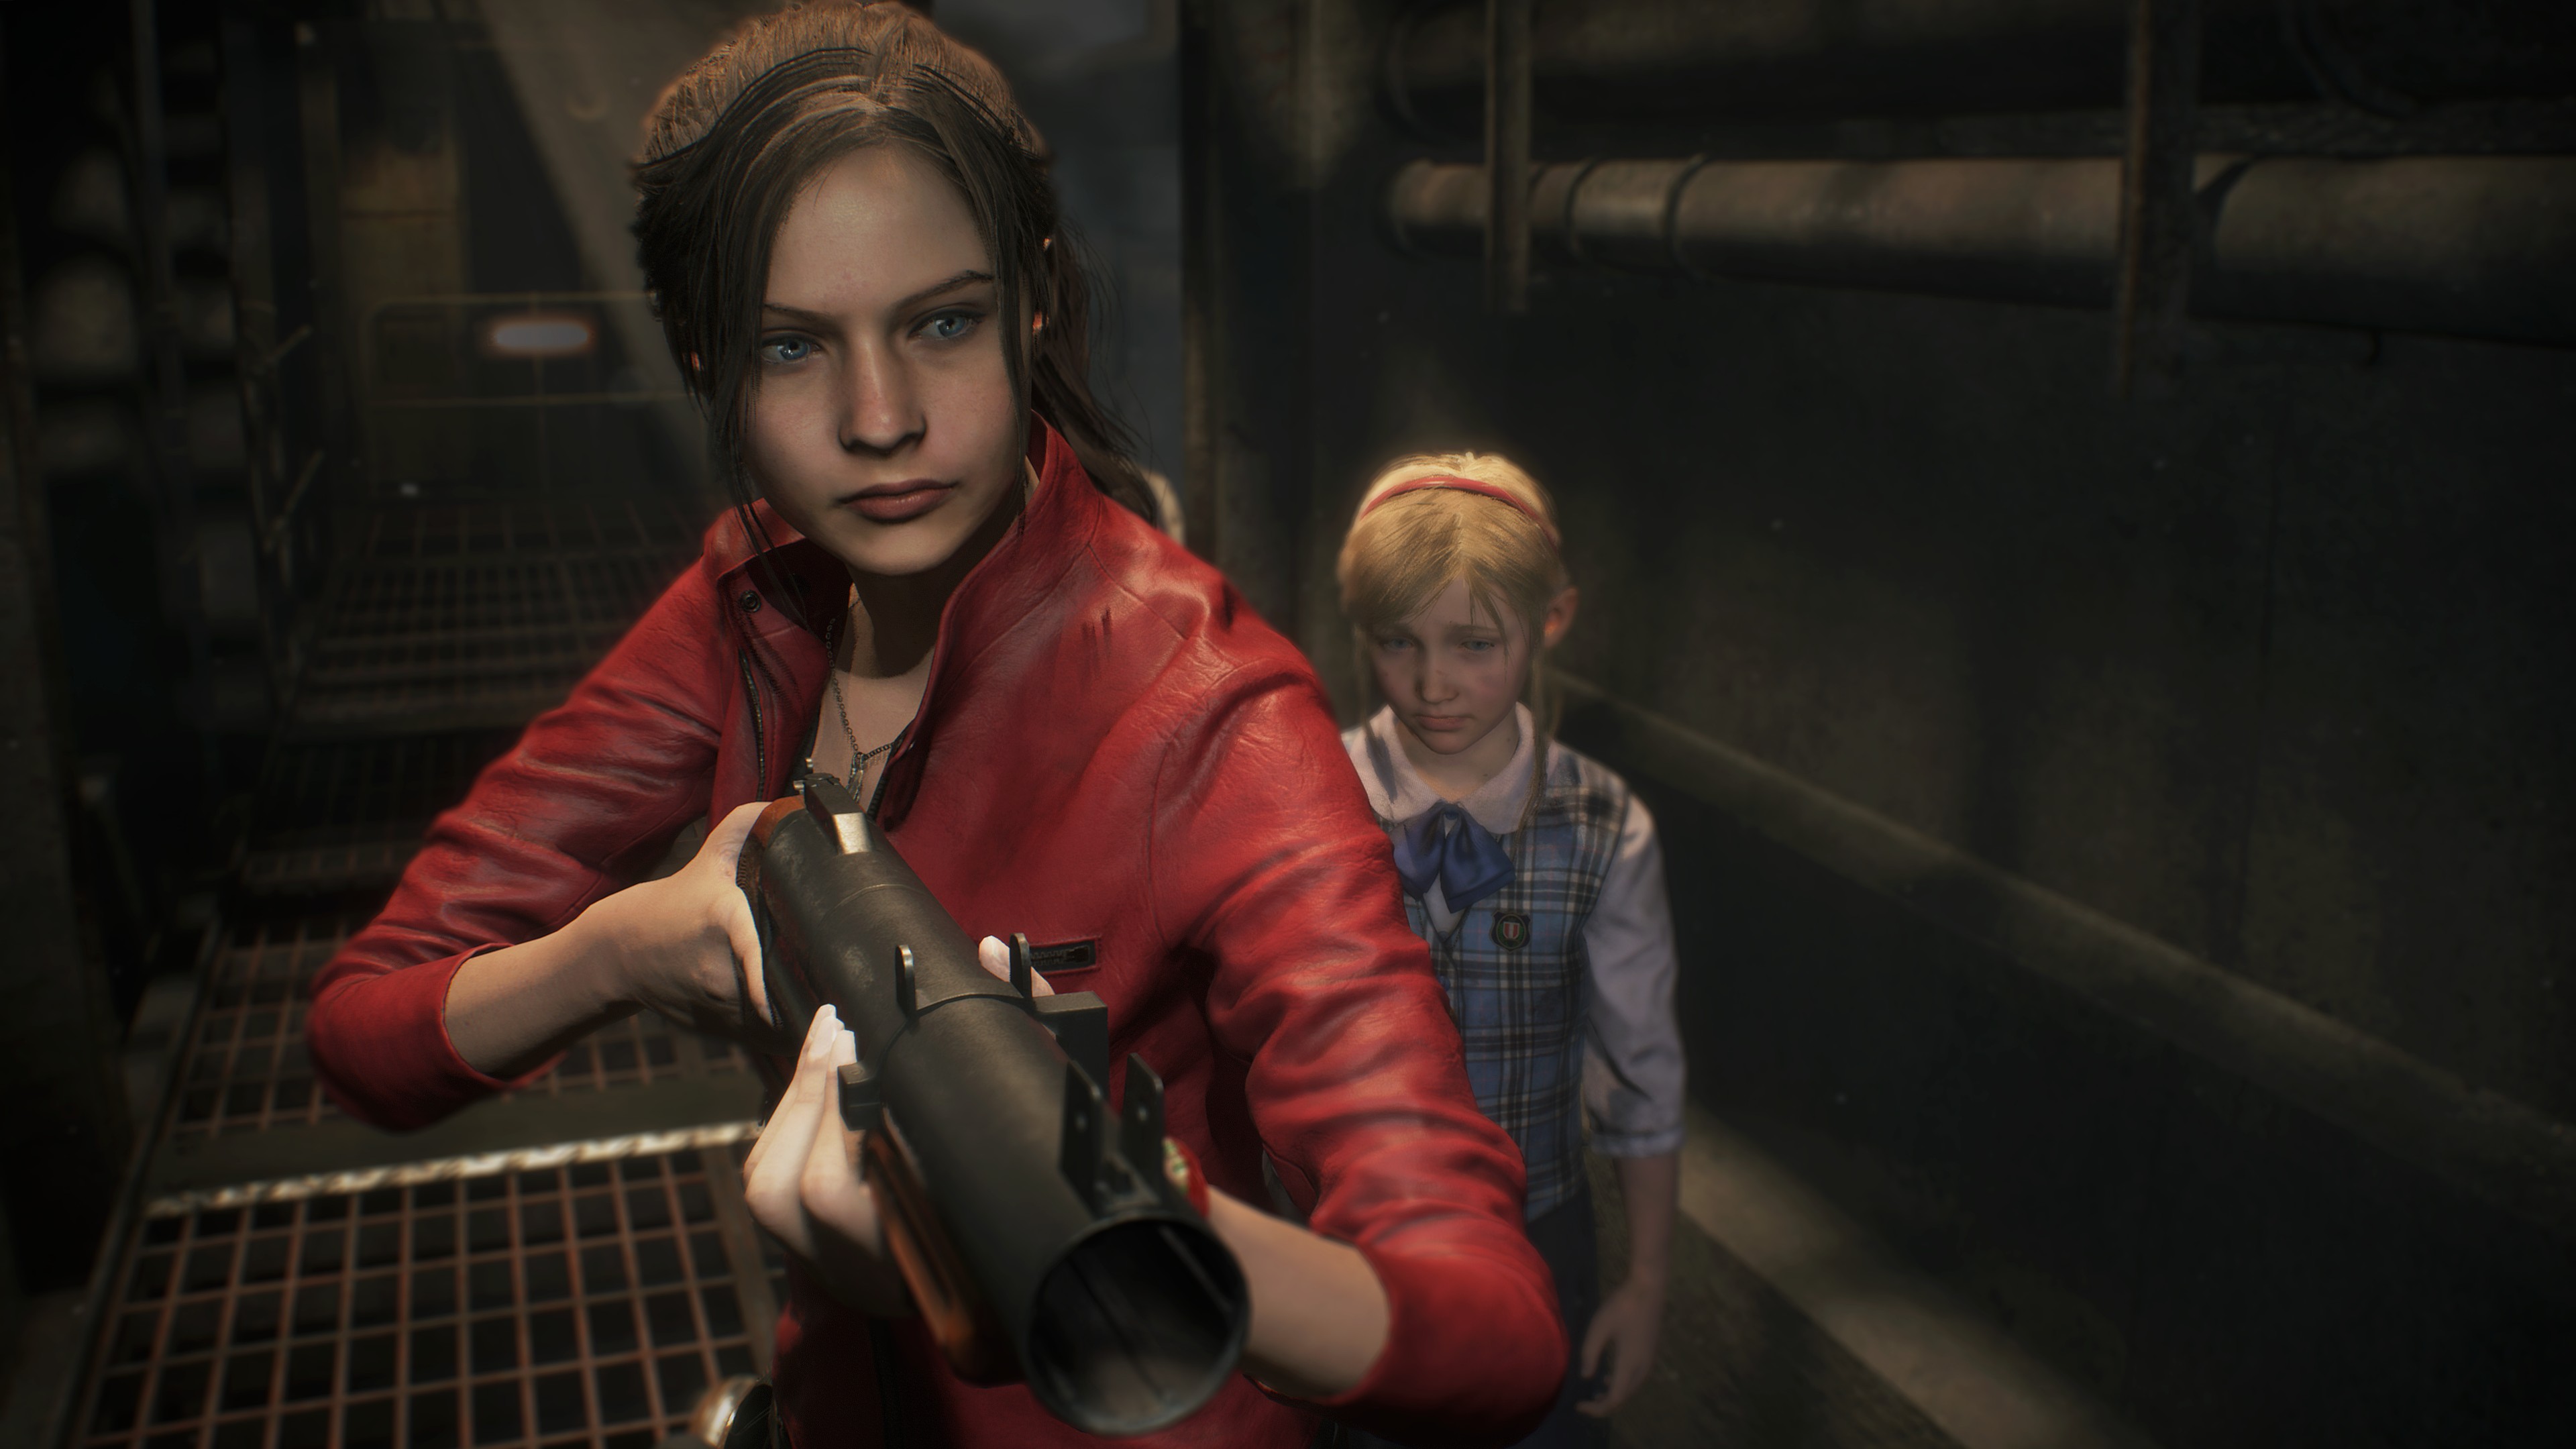 Claire aims her gun into the darkness in Resident Evil 2